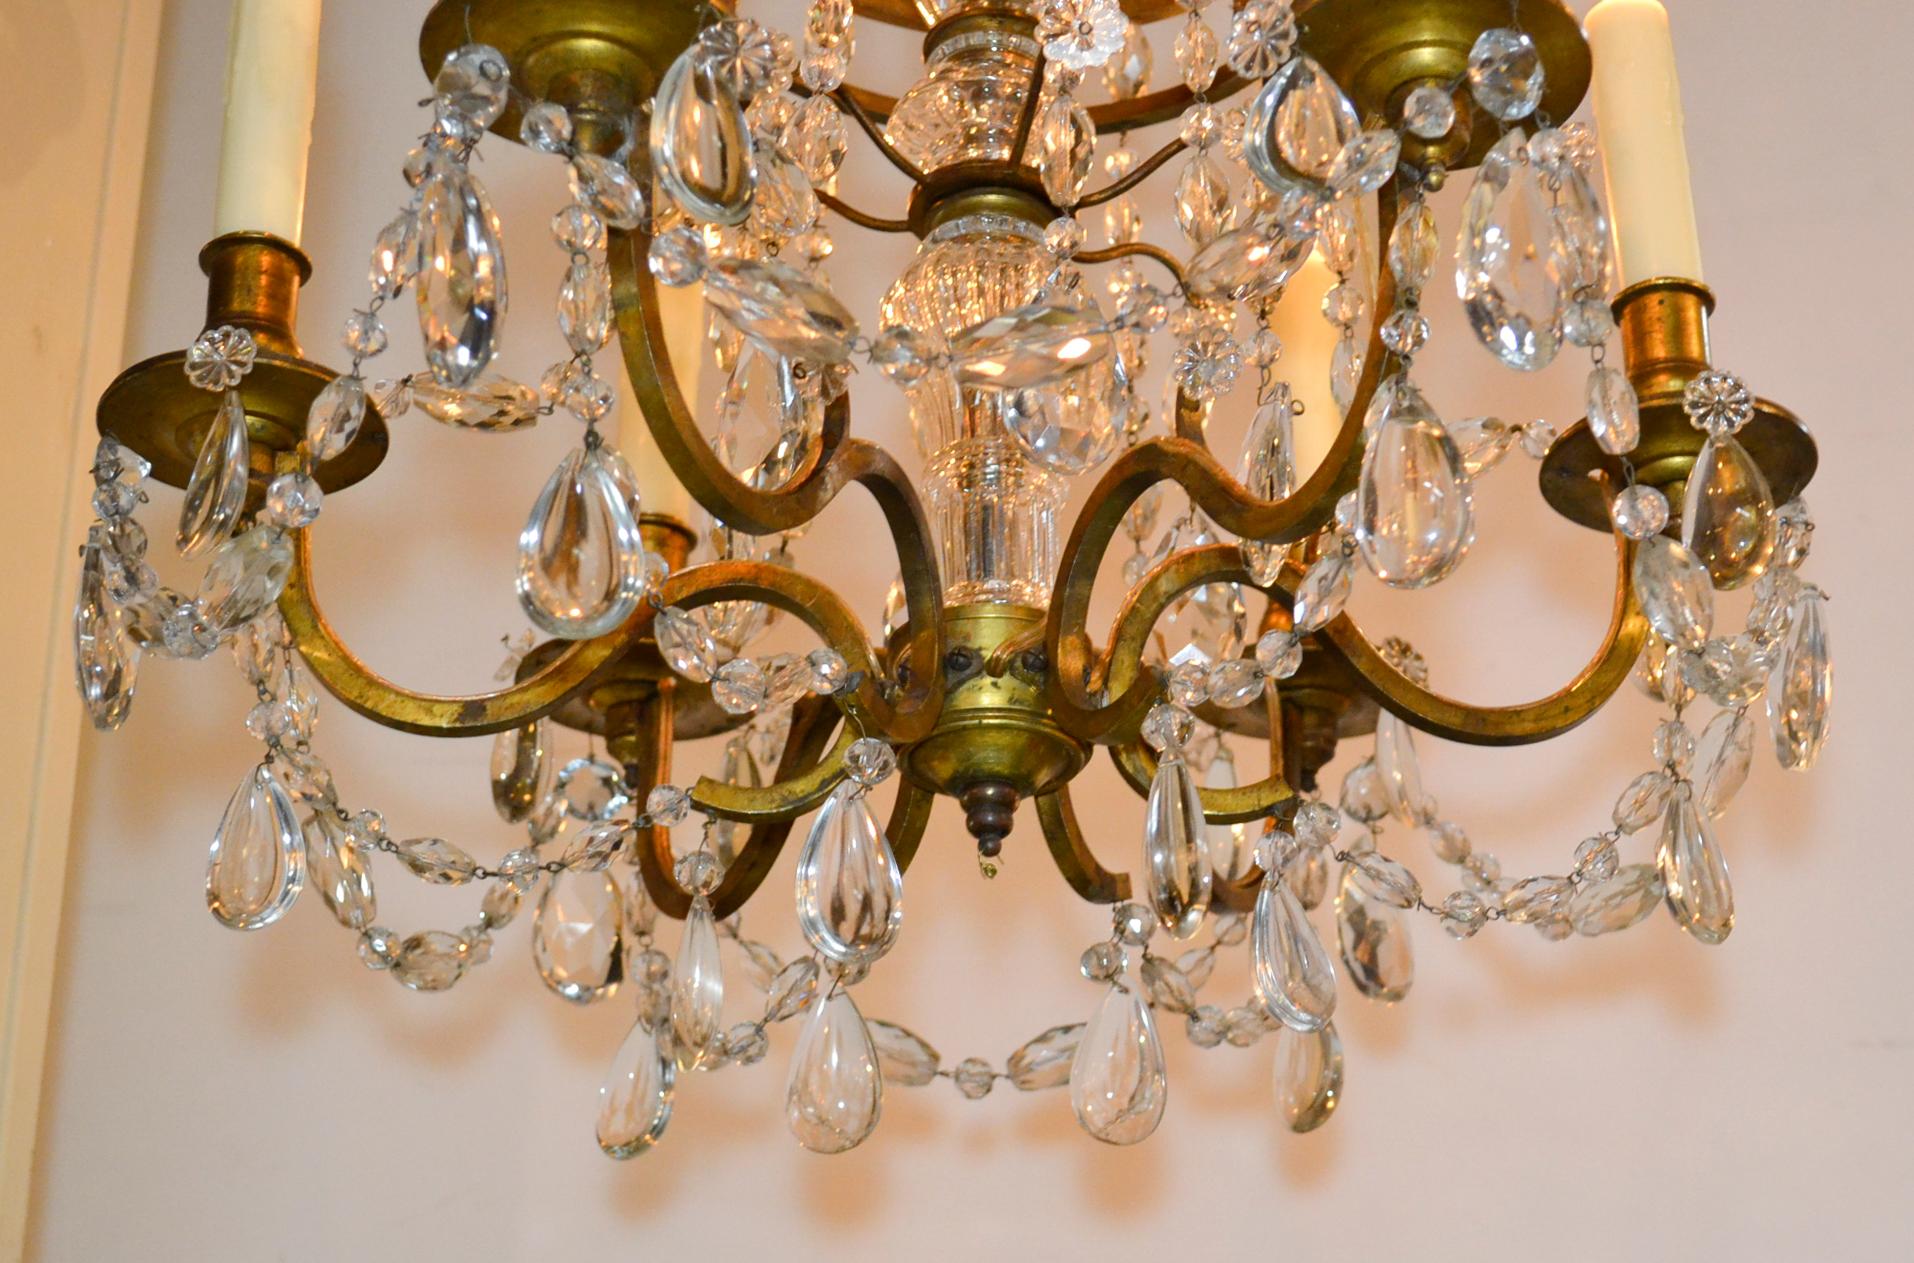 Great 19th century northern Italian gilt bronze and crystal 6-light chandelier.